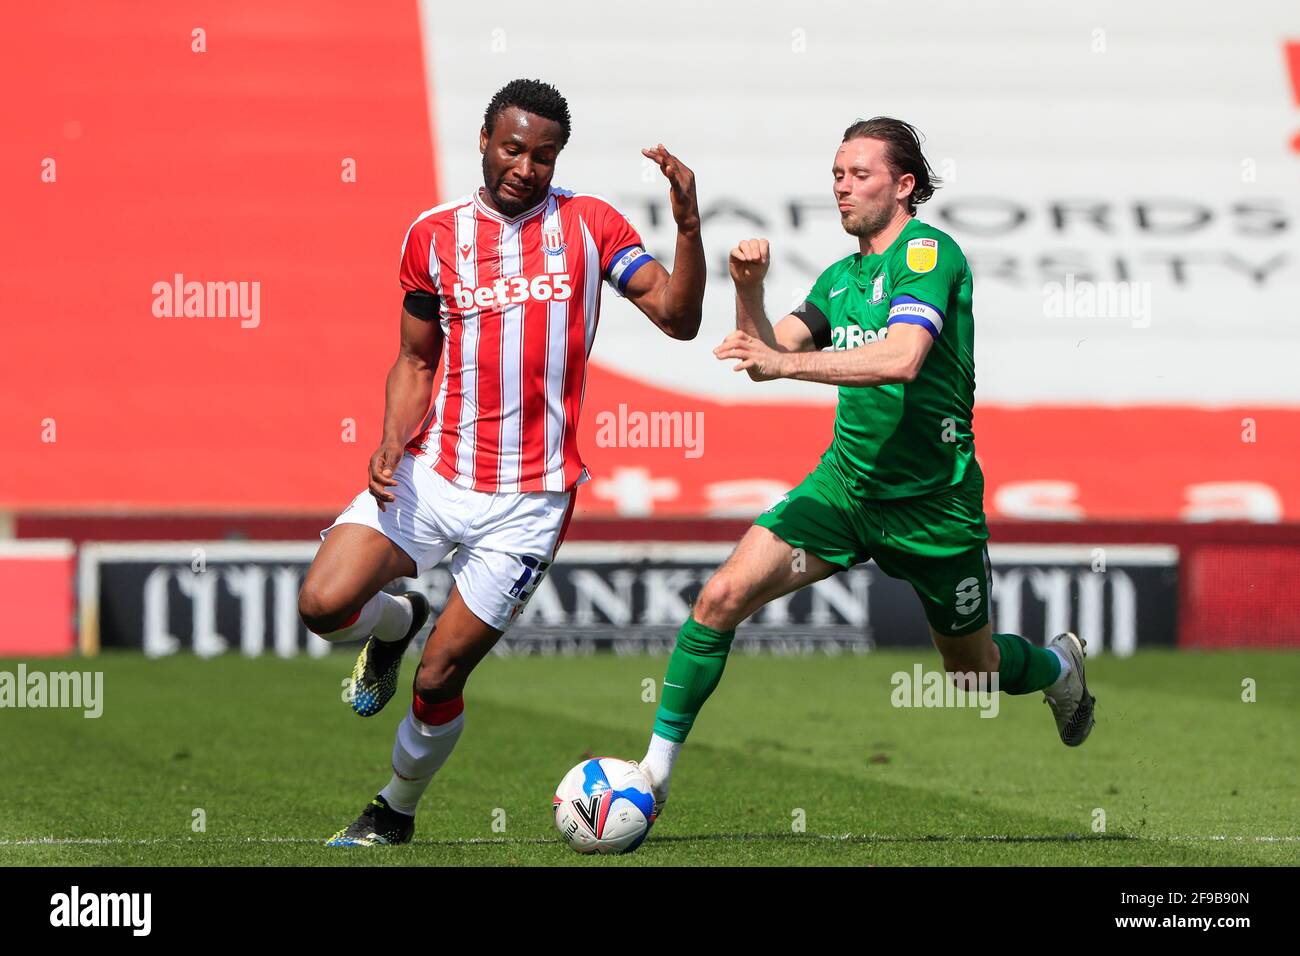 John Obi Mikel #13 of Stoke City and Alan Browne #8 of Preston North End challenge for the ball in Stoke-on-Trent, UK on 4/17/2021. (Photo by Conor Molloy/News Images/Sipa USA) Stock Photo